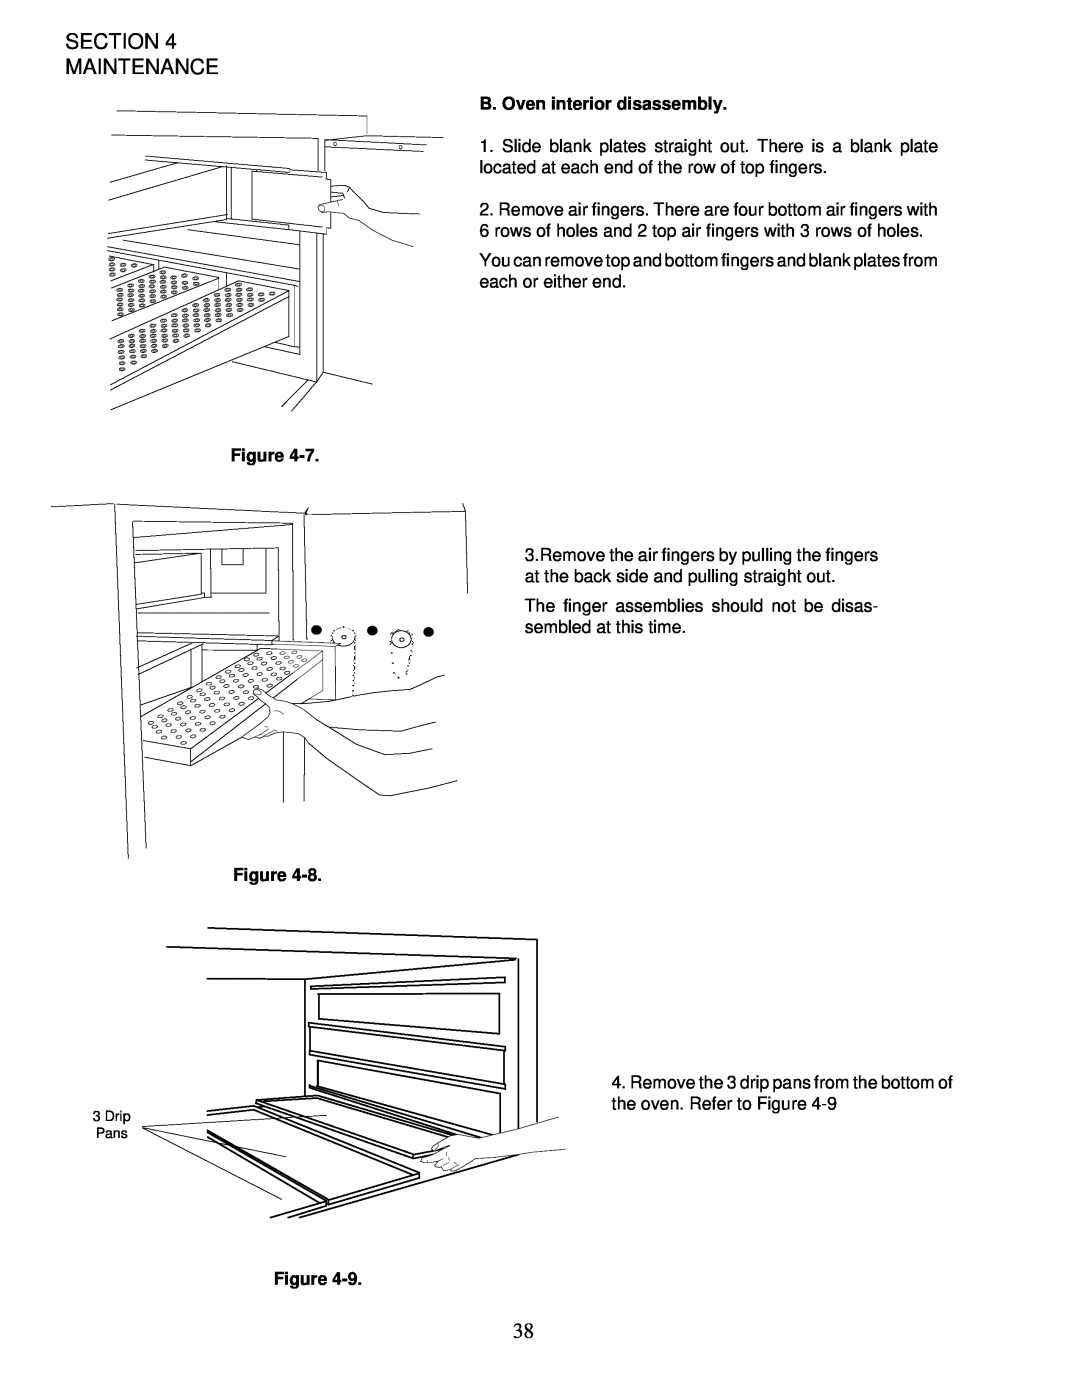 Middleby Marshall PS200-R68 installation manual Section Maintenance, B. Oven interior disassembly, Figure 